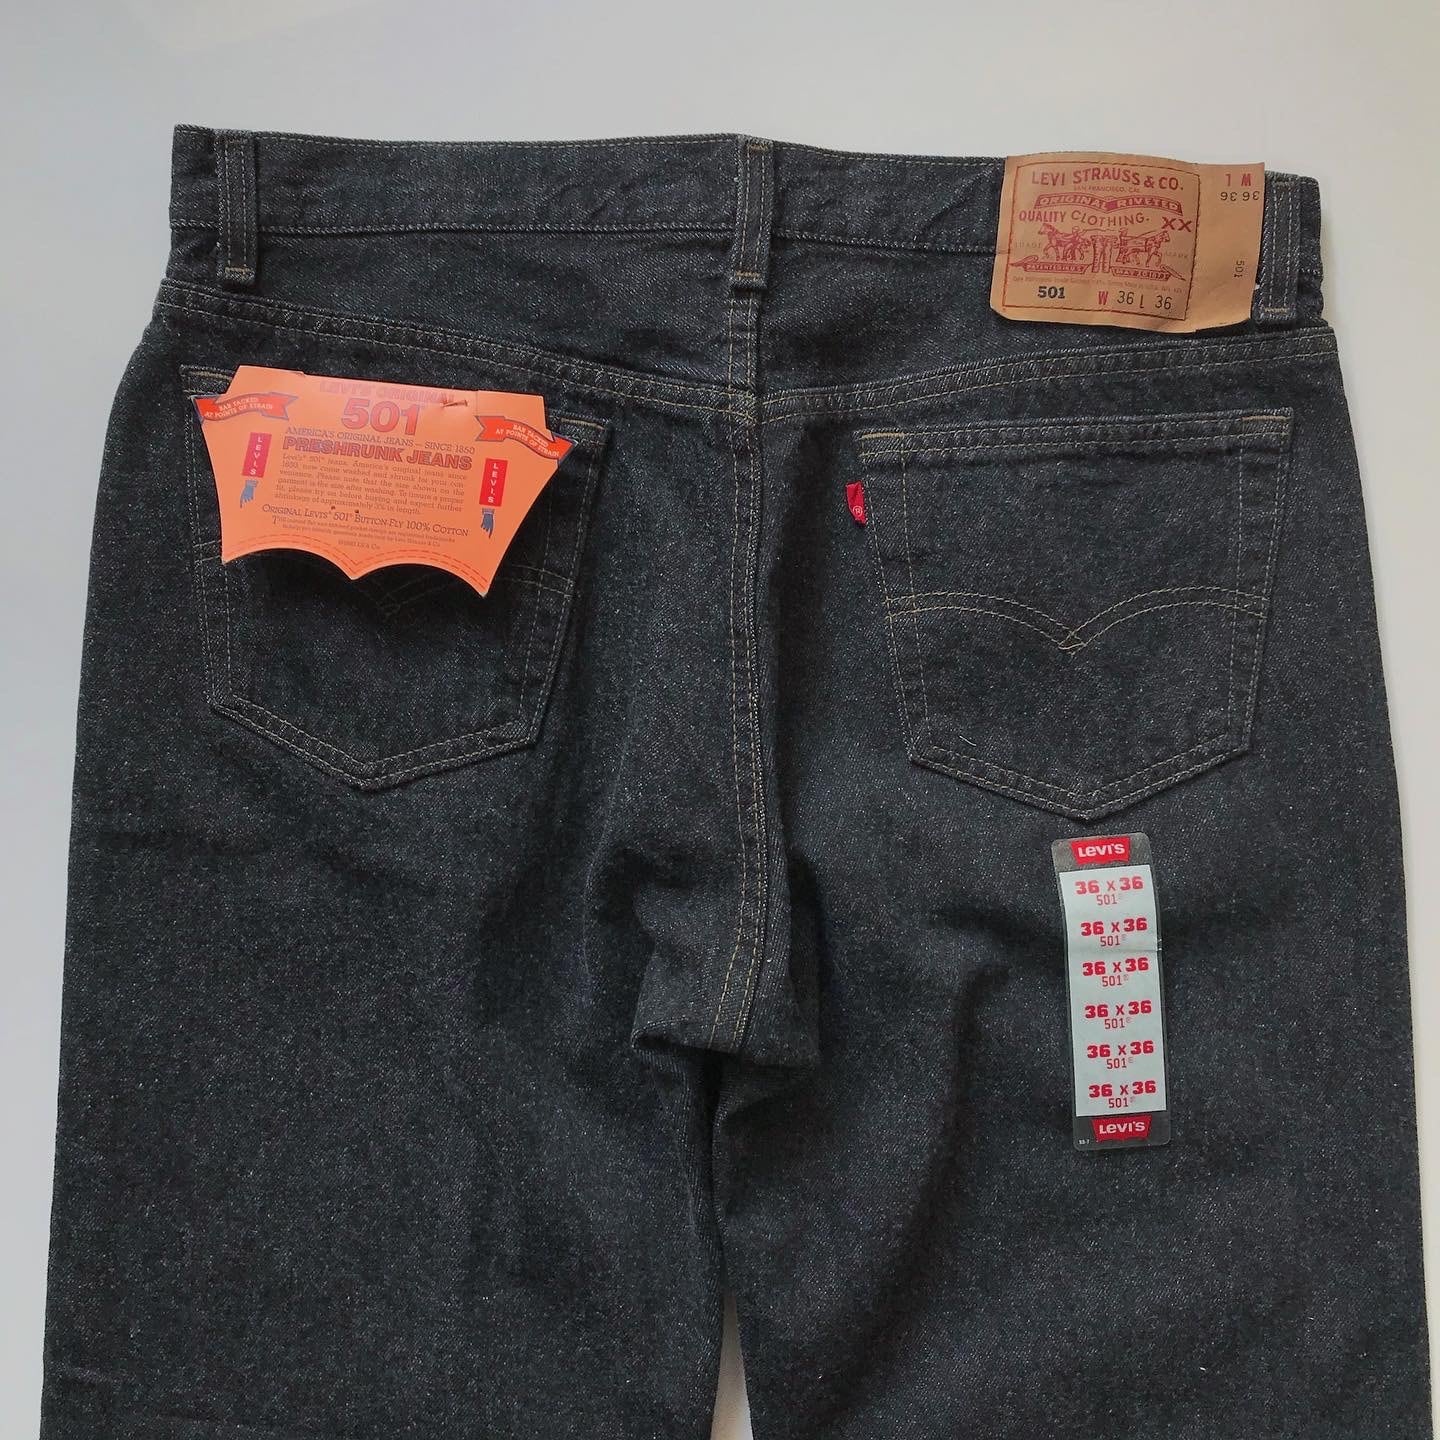 Levi's 501 yarn dyed black denim "DEAD STOCK" | ON THE HILL